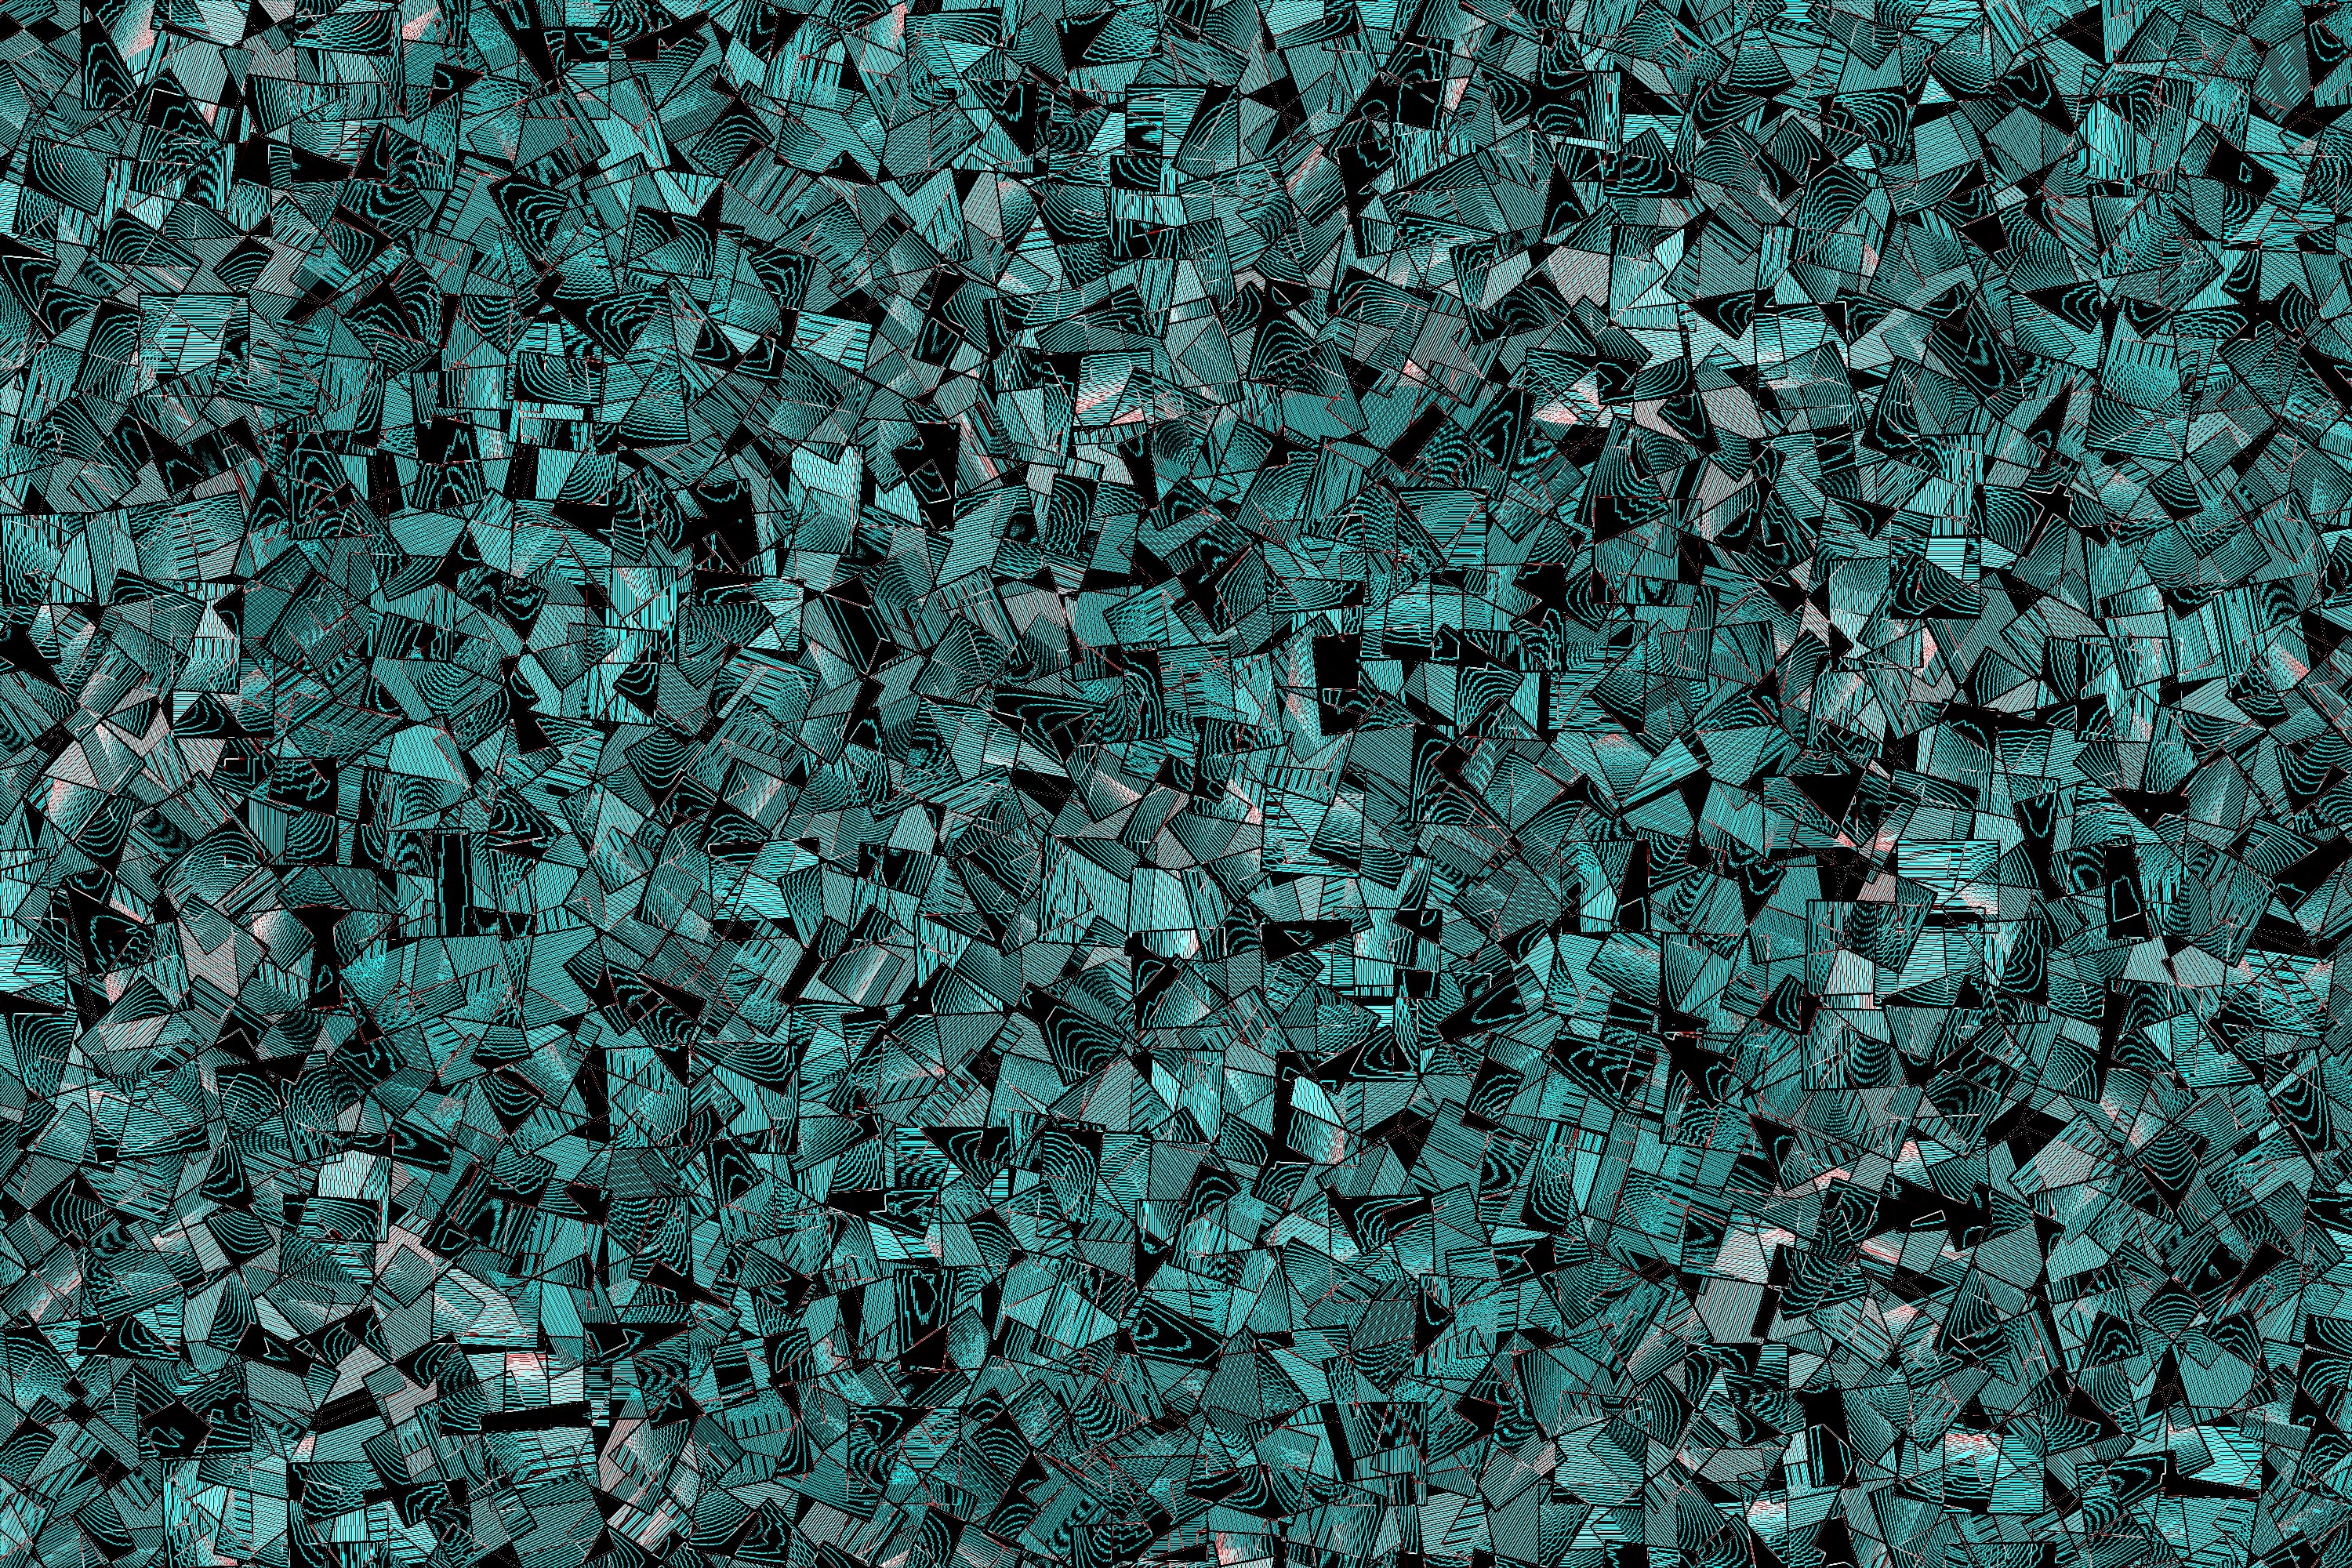 4K, FHD, UHD form, forms, textures, cubism